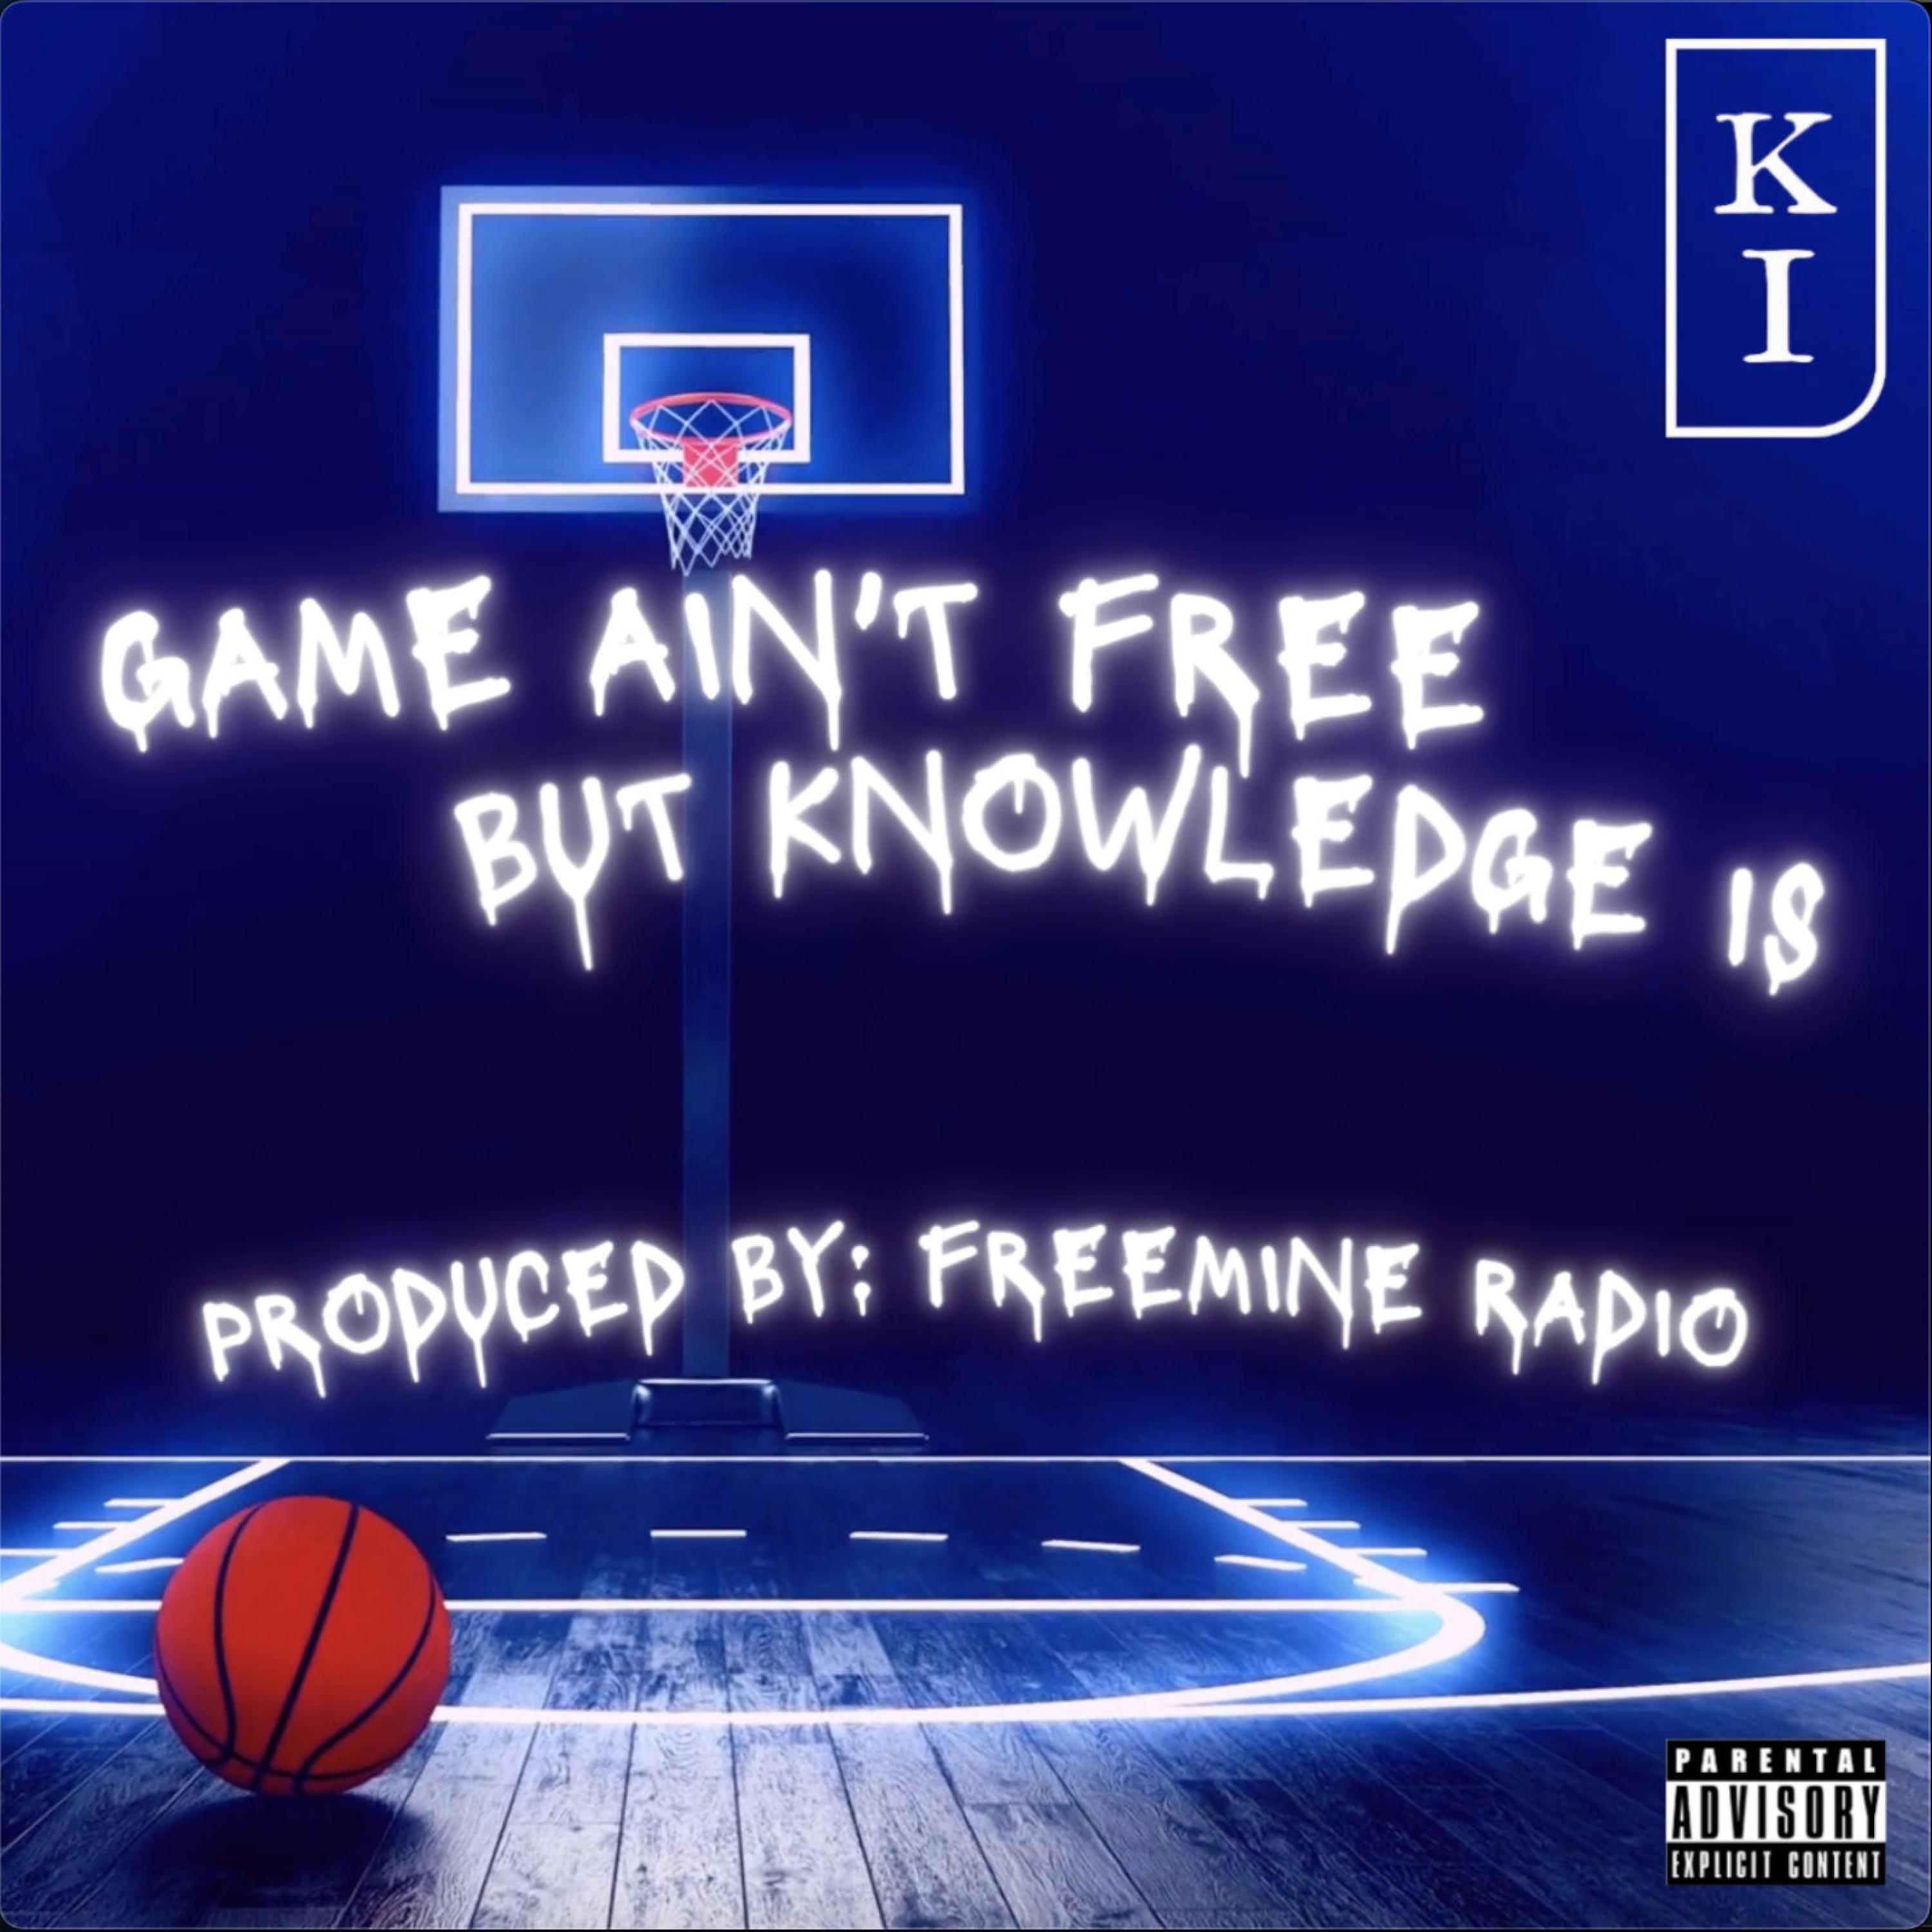 Knowledge is K.I - Knowledge is FREE